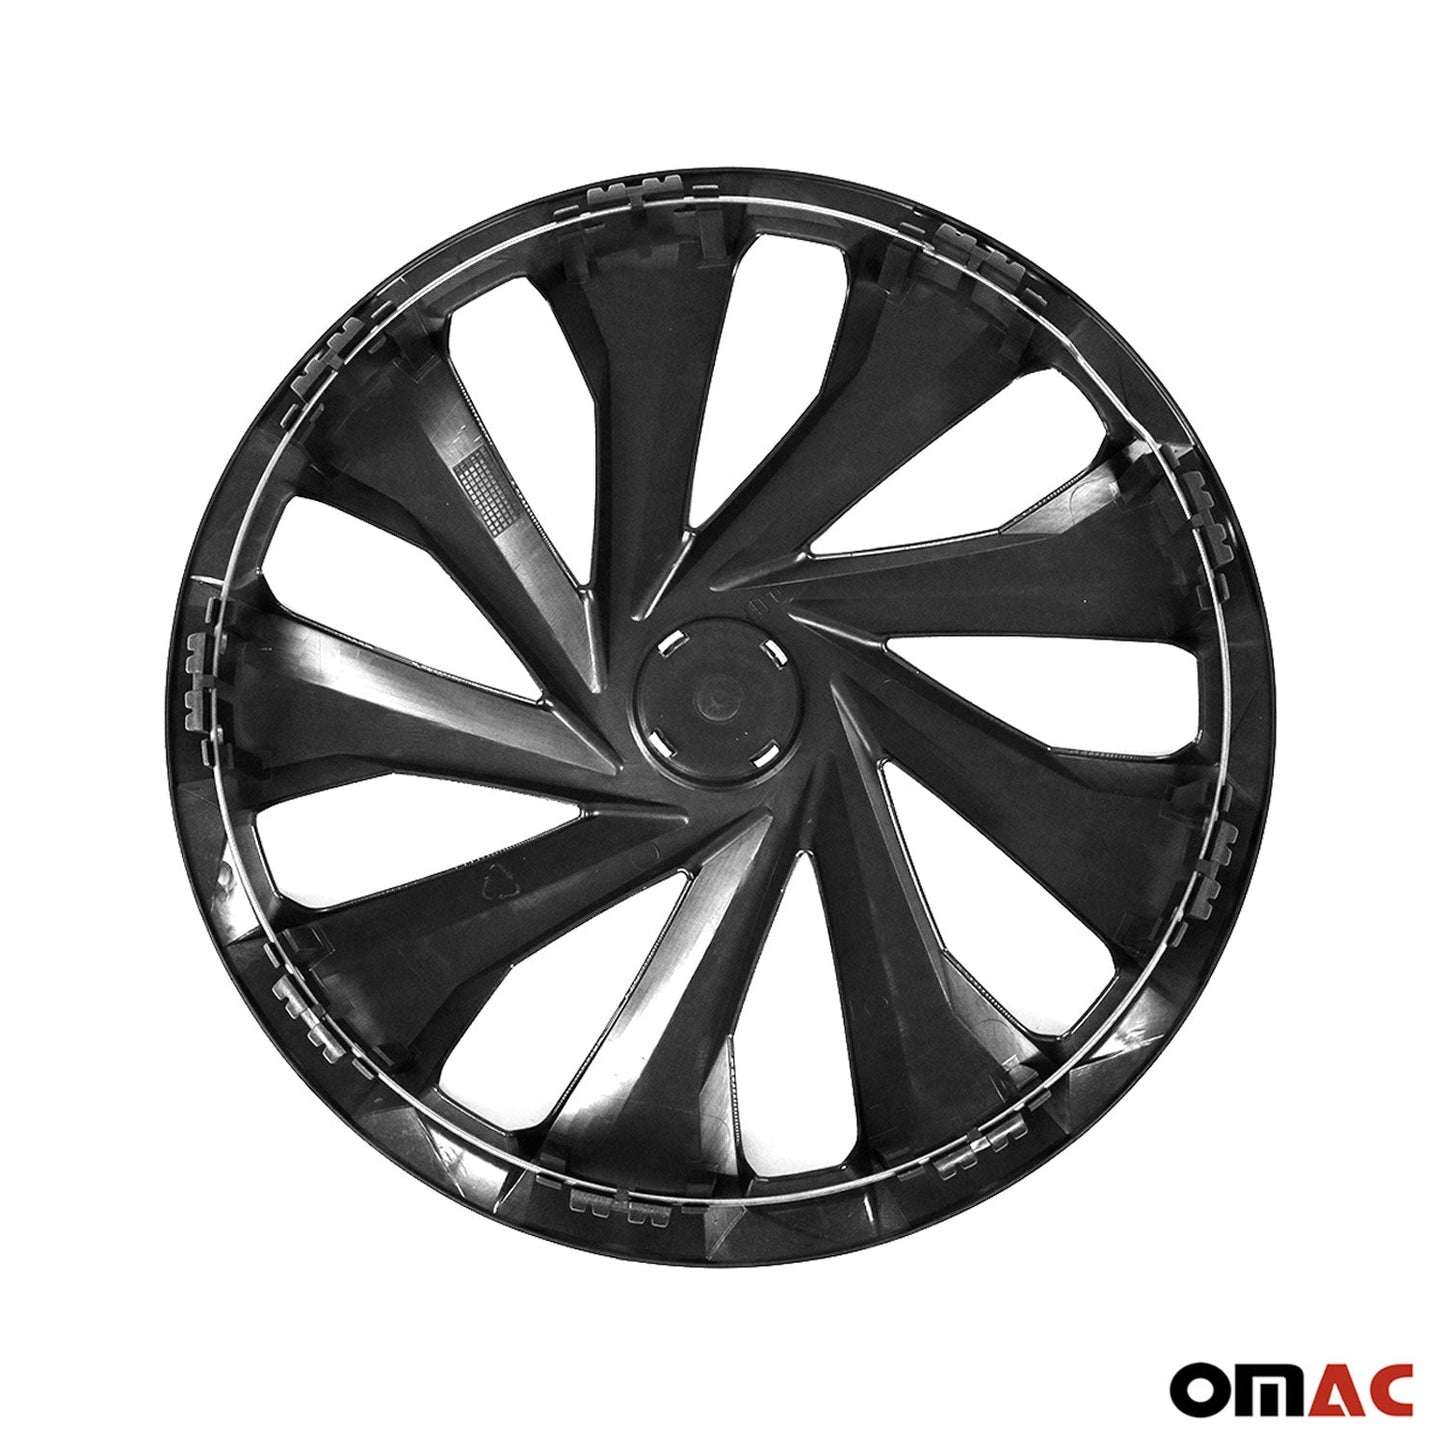 OMAC 15 Inch Wheel Rim Covers Hubcaps for Buick Black Gloss G002450